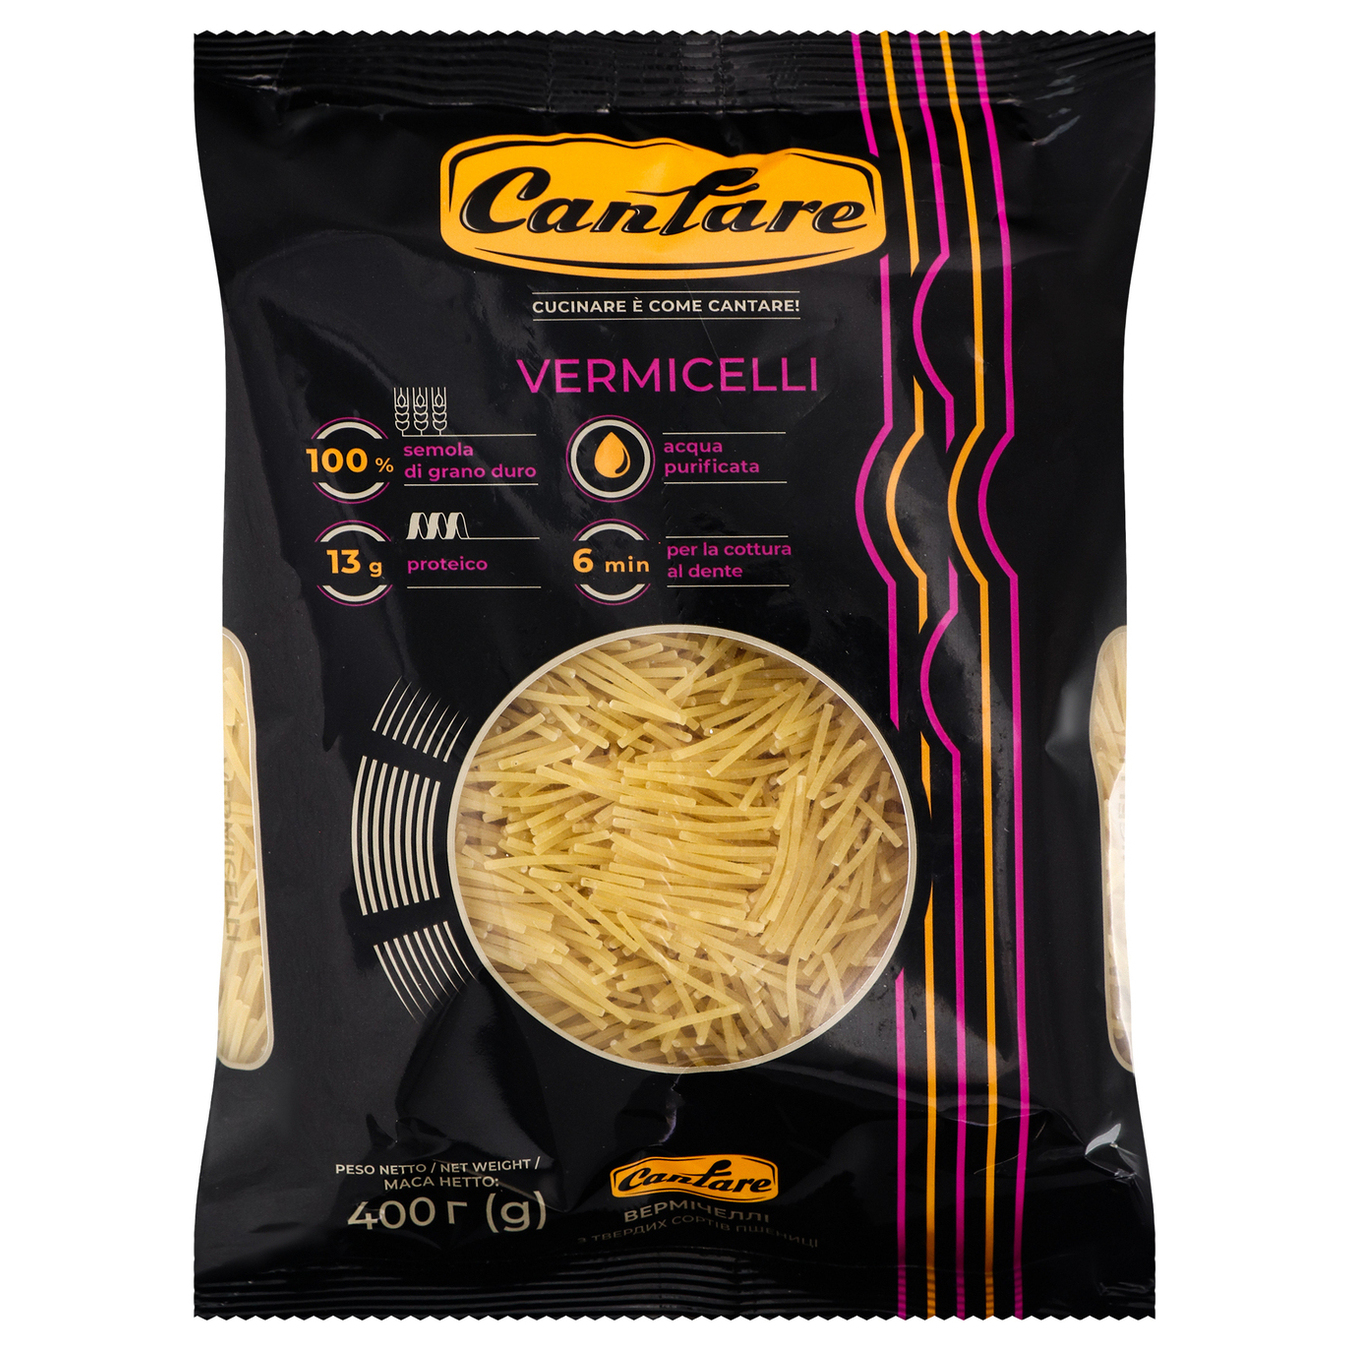 Cantare Vermicelli pasta products 400g